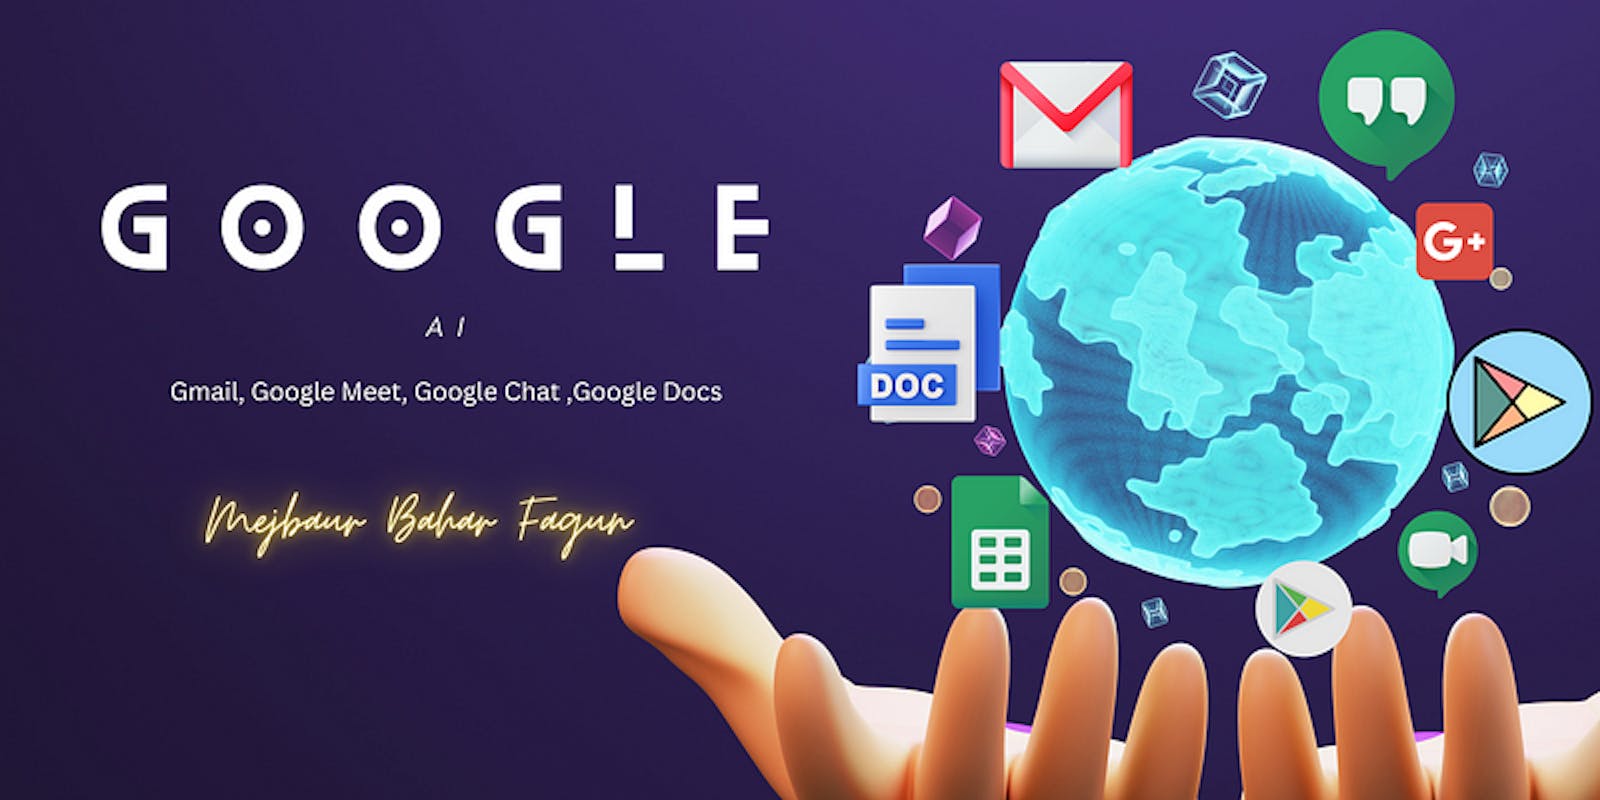 Boosting Productivity: Google Announces AI Features in Gmail, Docs, and More